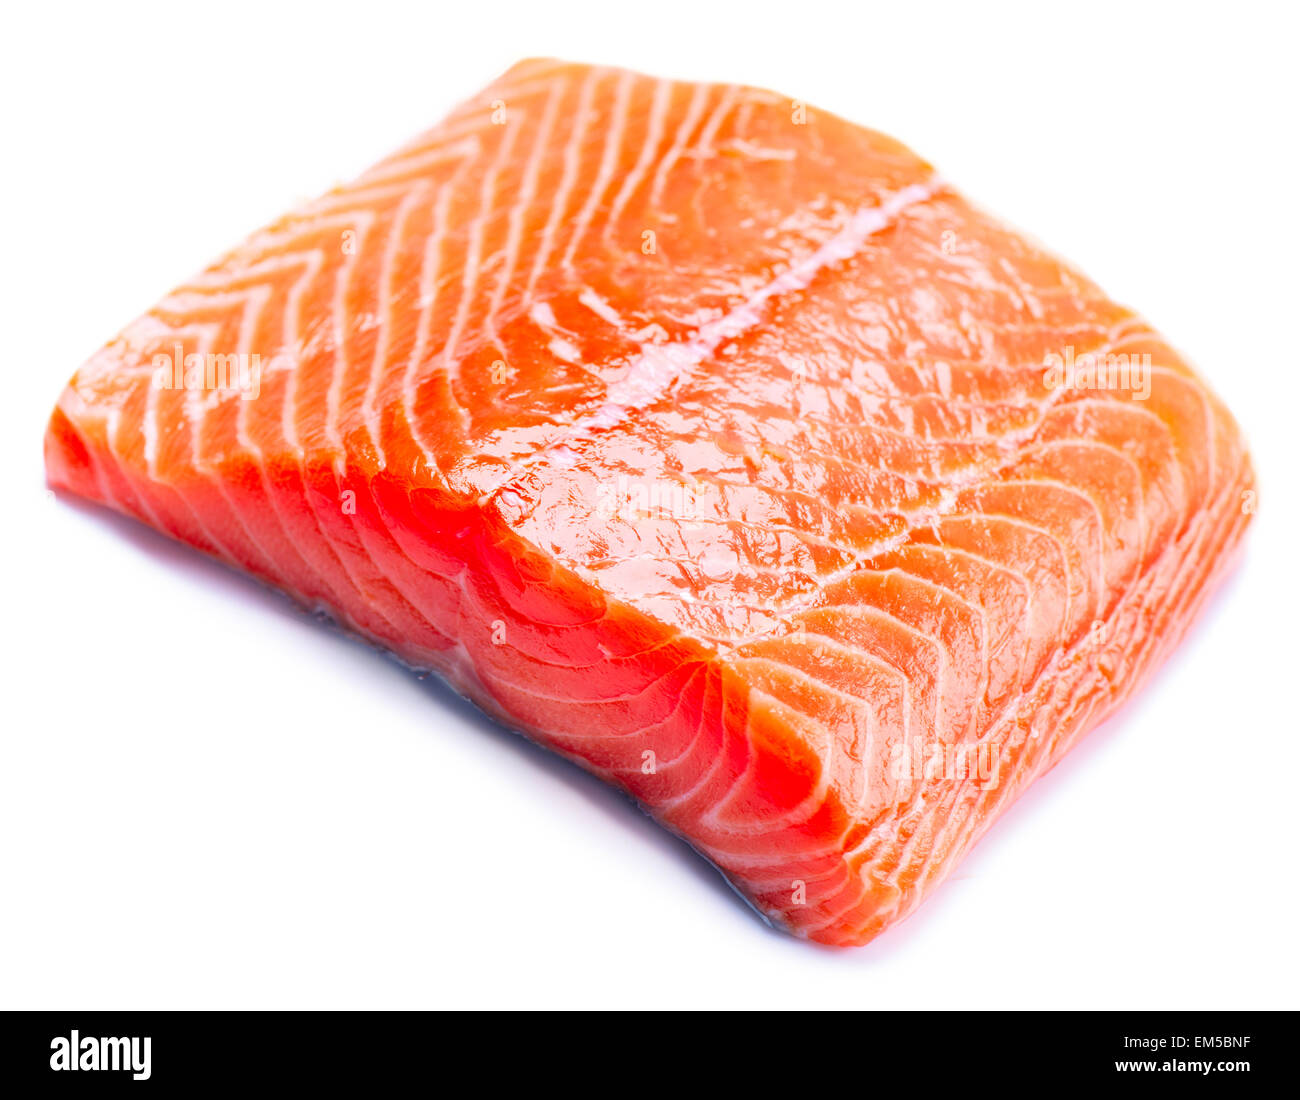 Salmon Raw Fillet. Red Fish isolated on a White Background Stock Photo